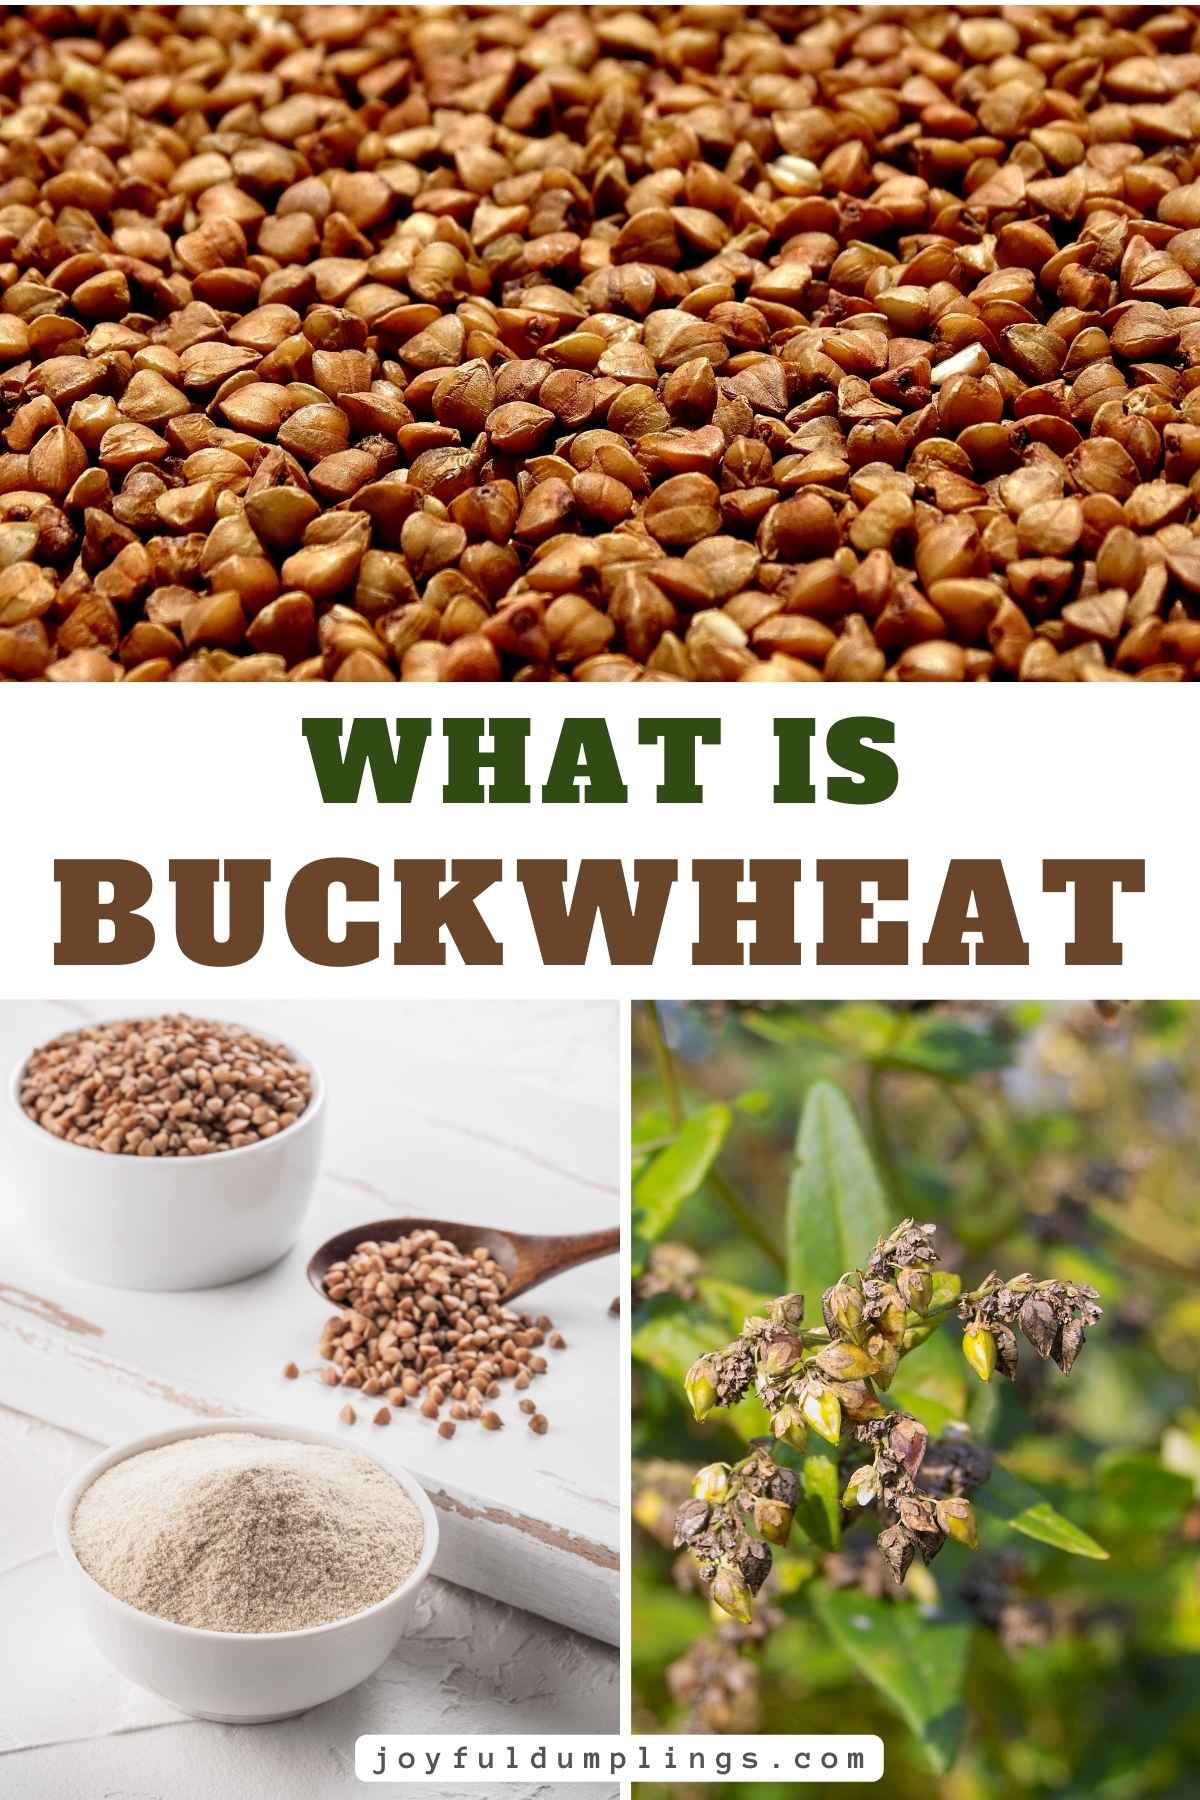 What is Buckwheat? Your Questions Answered!